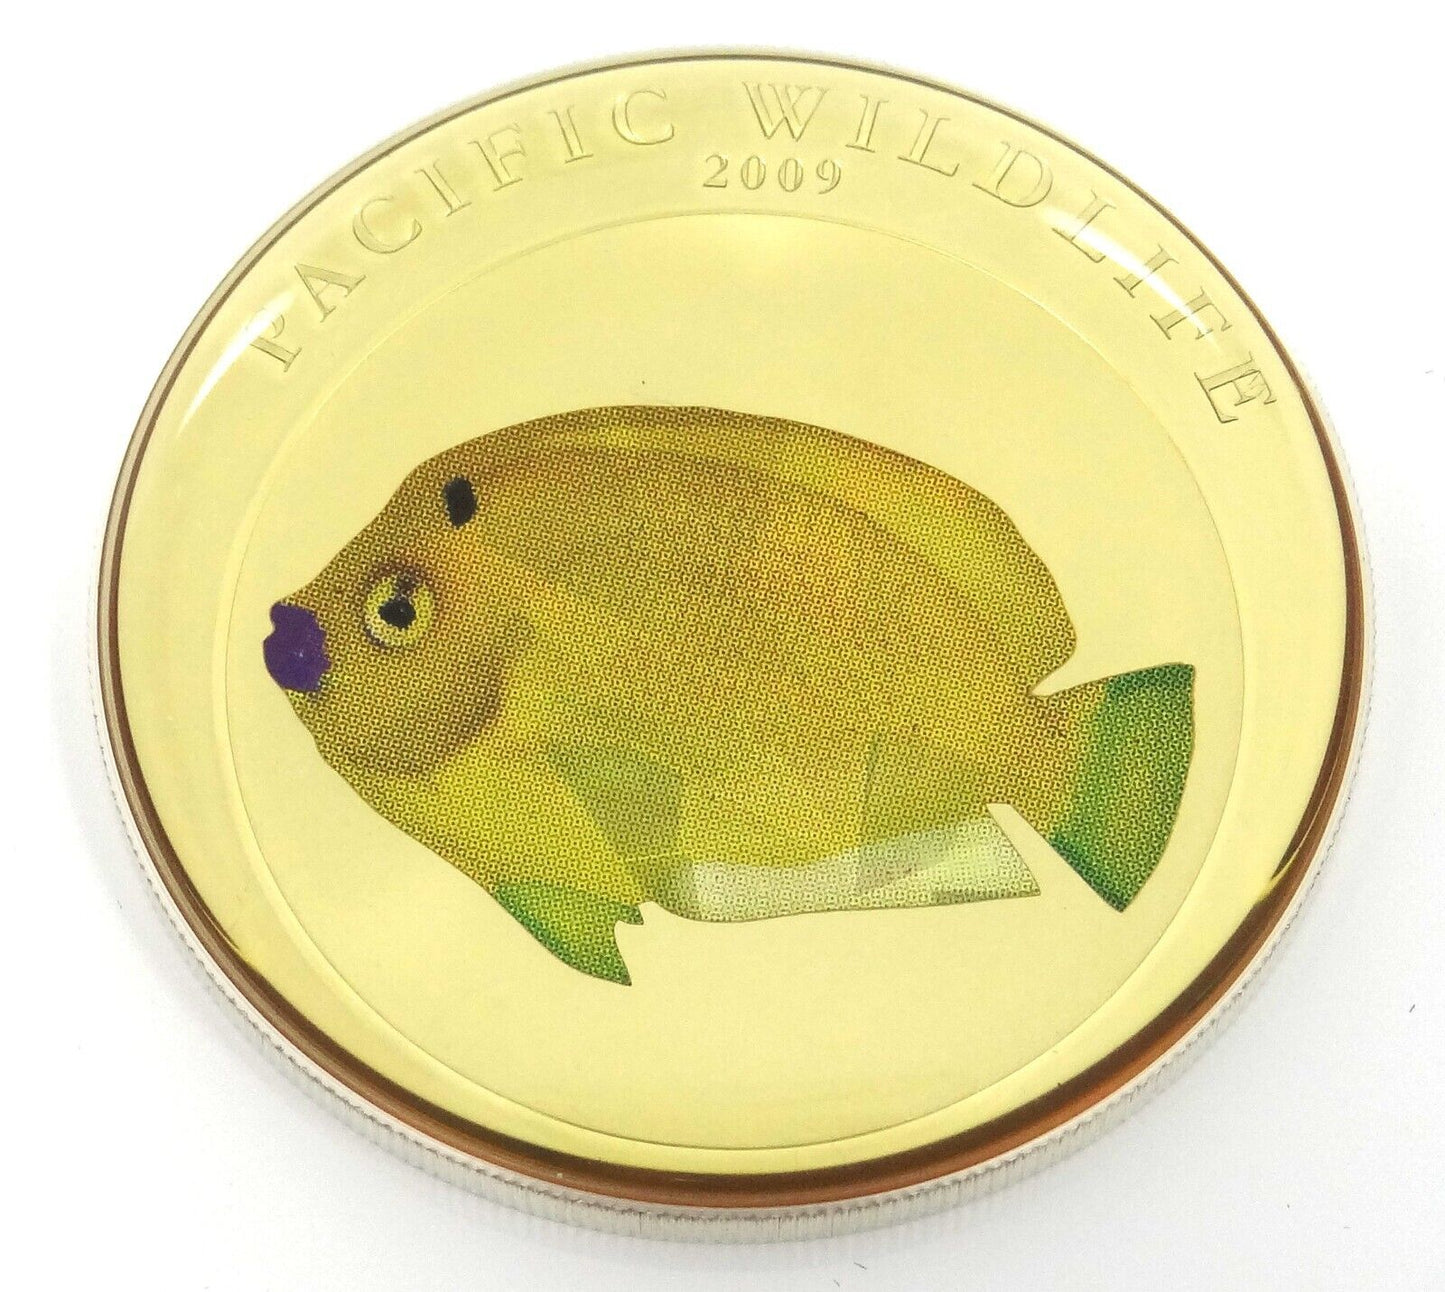 25g Silver Coin 2009 $5 Palau Pacific Wildlife Flagfin Angelfish Prism OGP